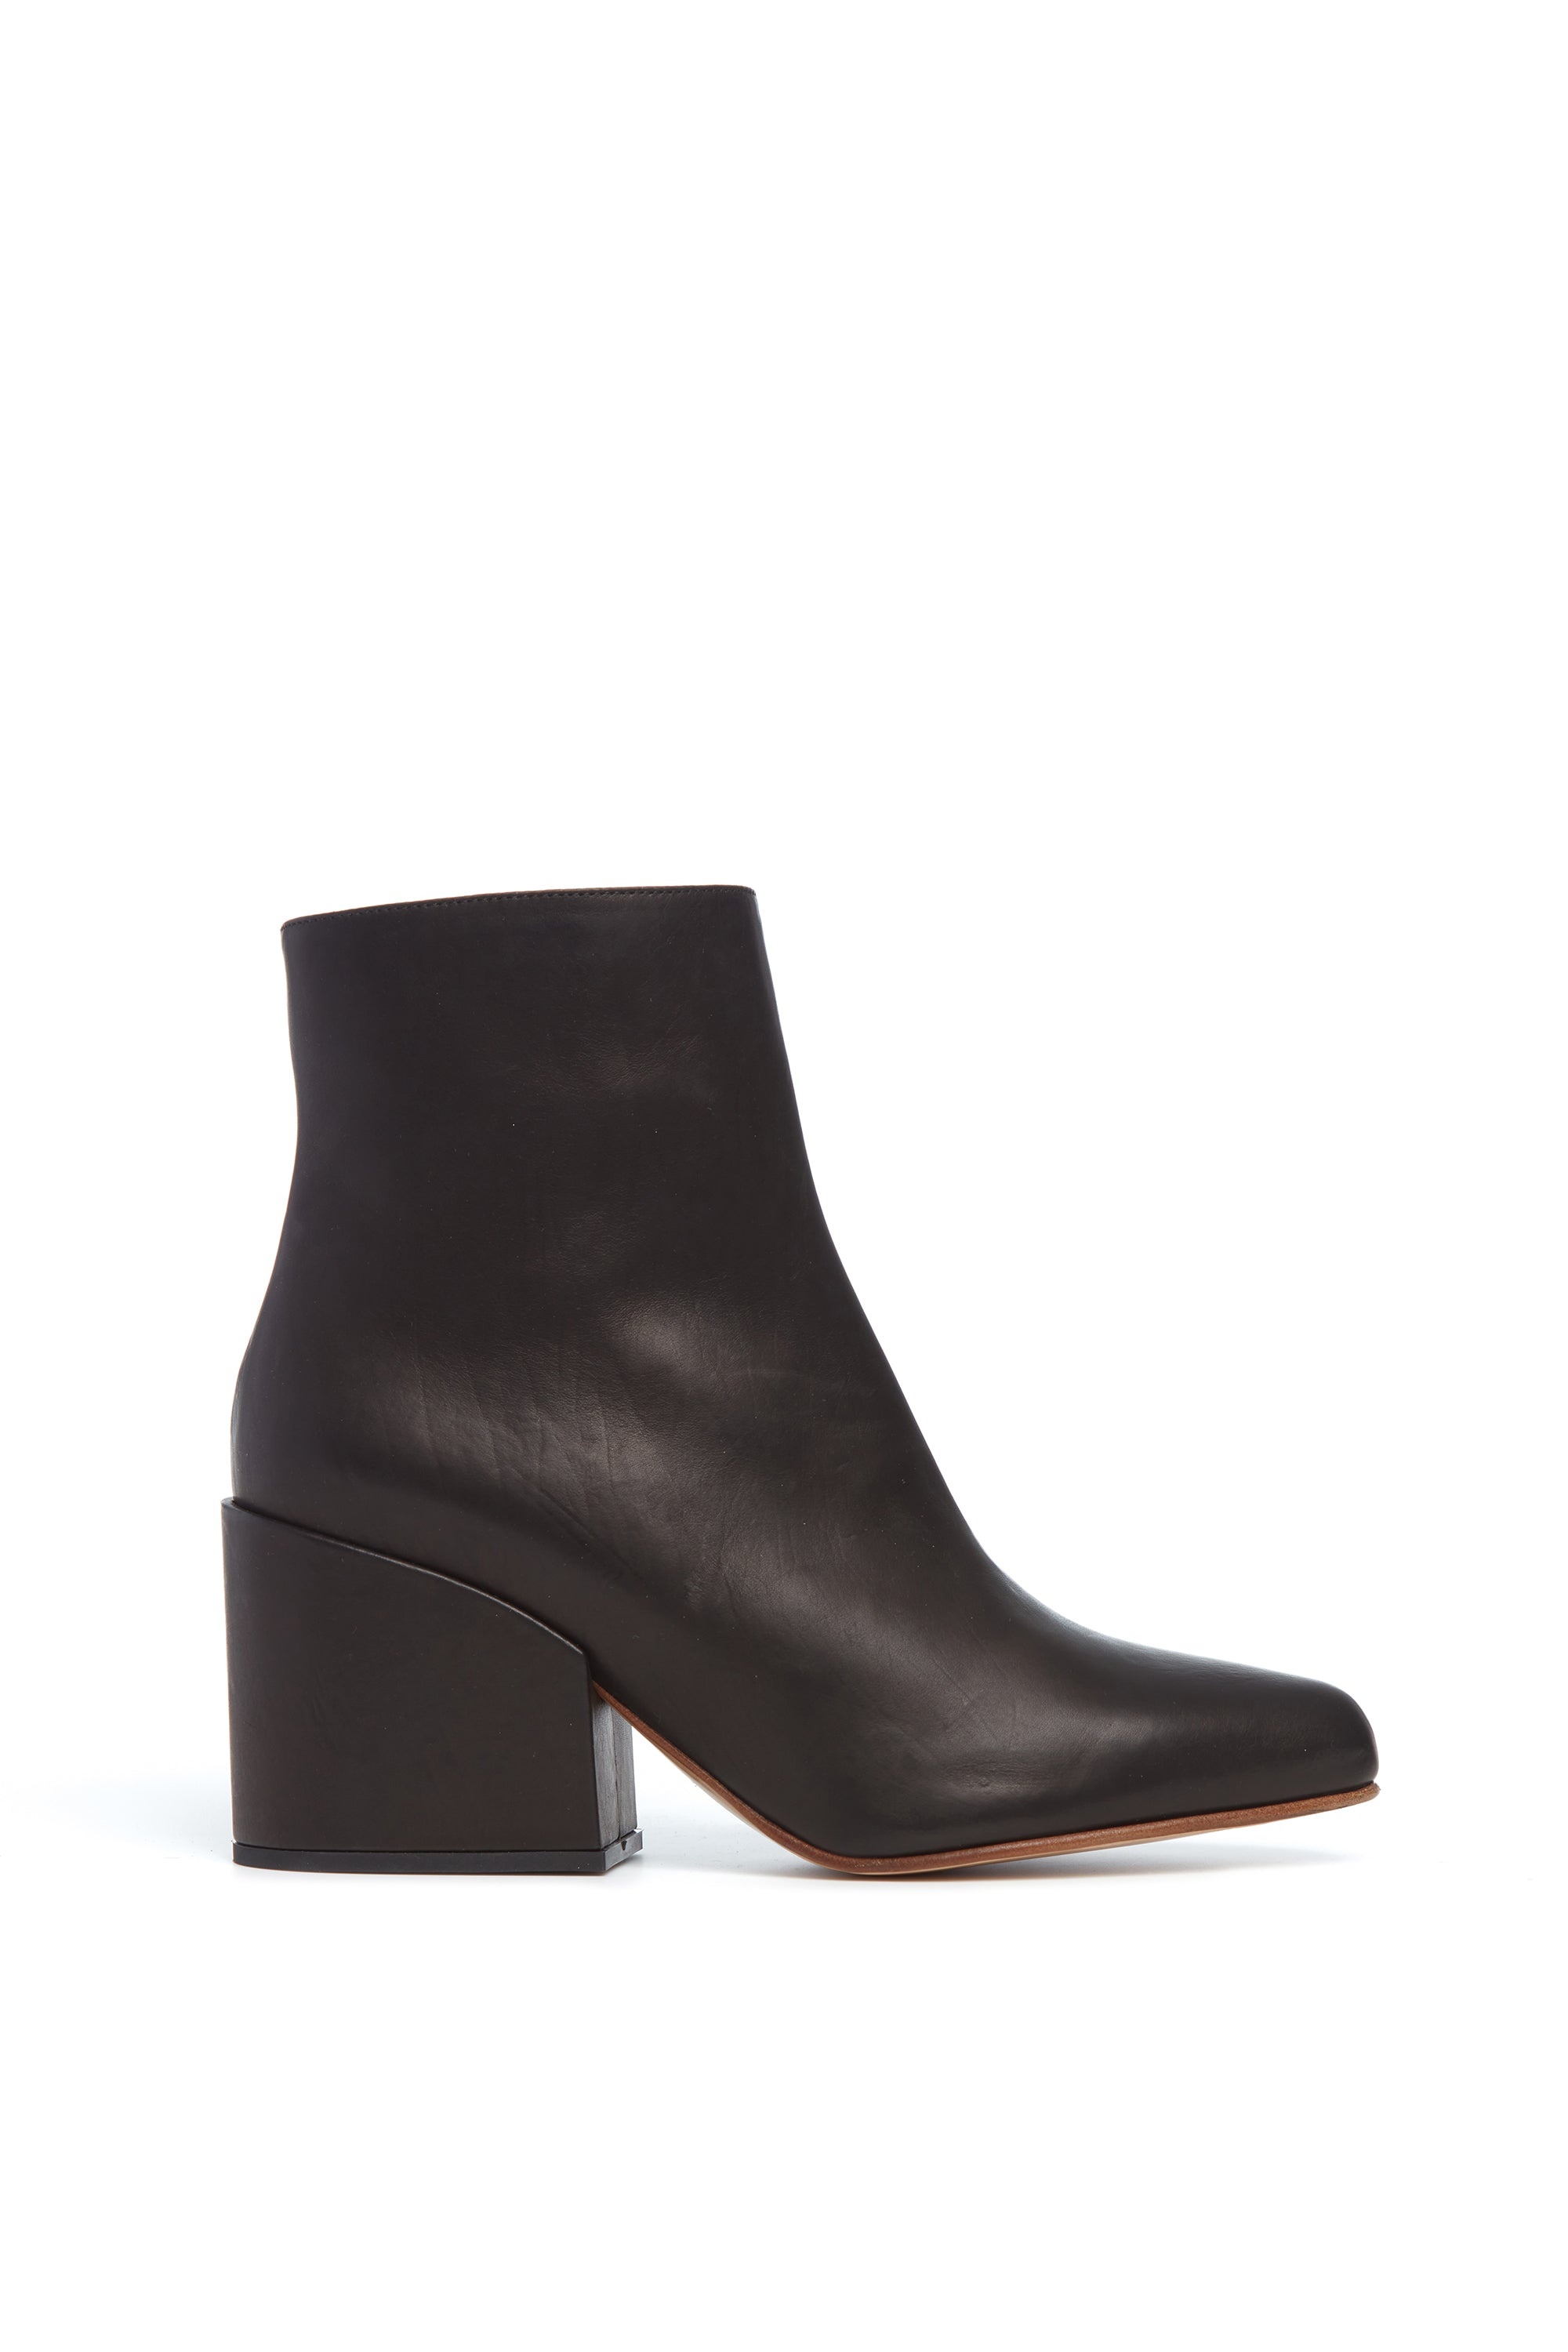 Tito Block Heel Boot in Black Leather - 1